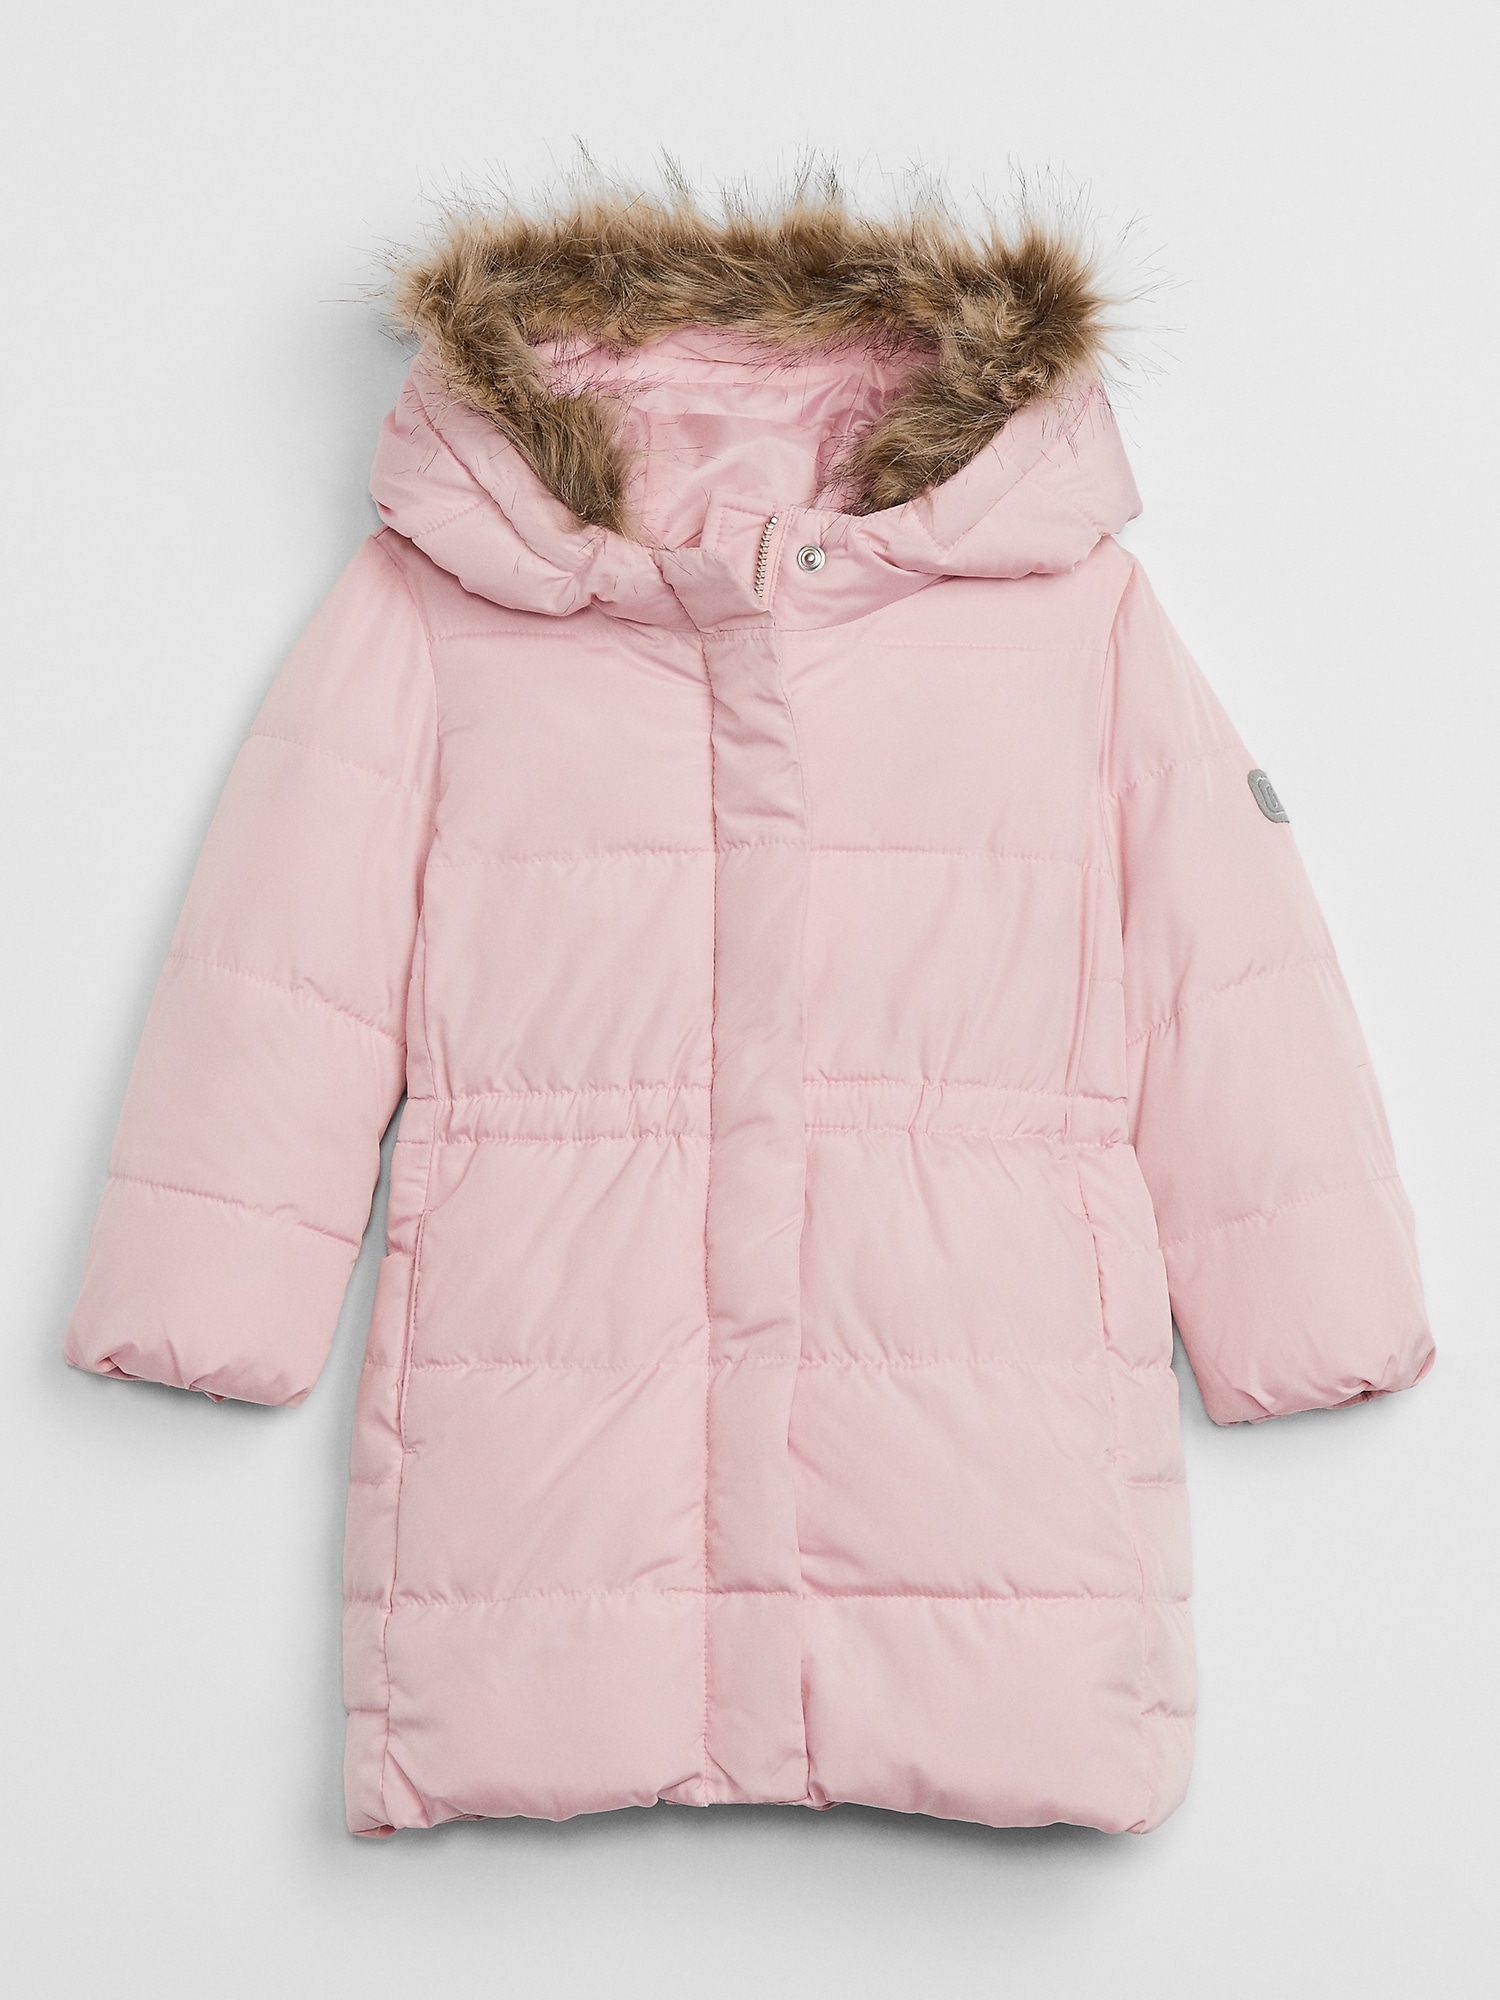 Toddler ColdControl Max Puffer Jacket | Gap Factory